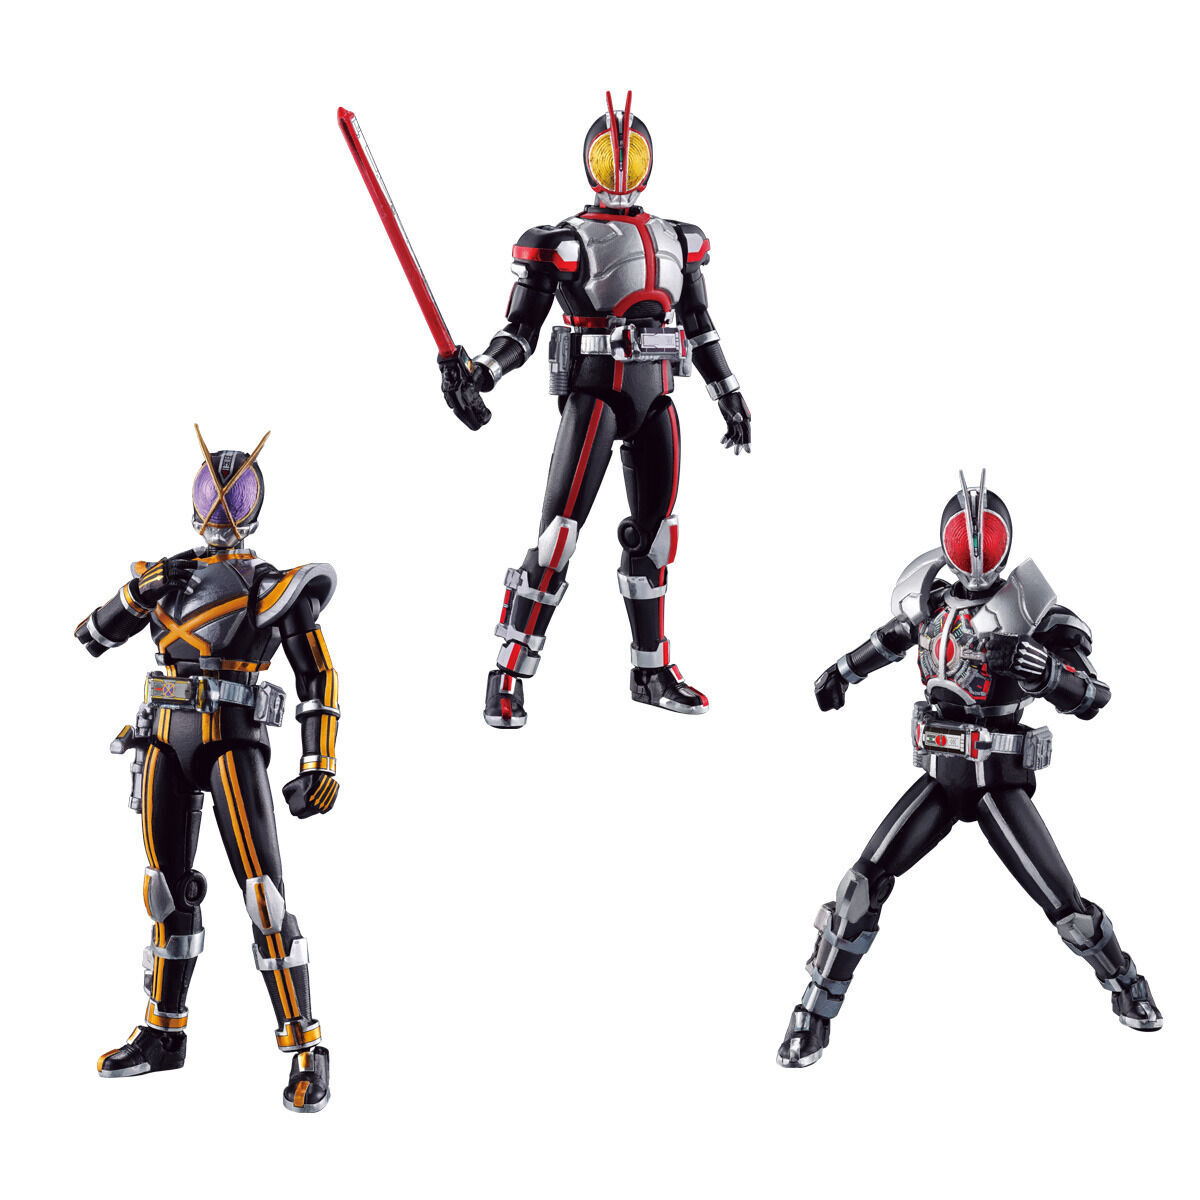 SO-DO CHRONICLE 層動 仮面ライダーオーズフルコンプセット3 | lasued